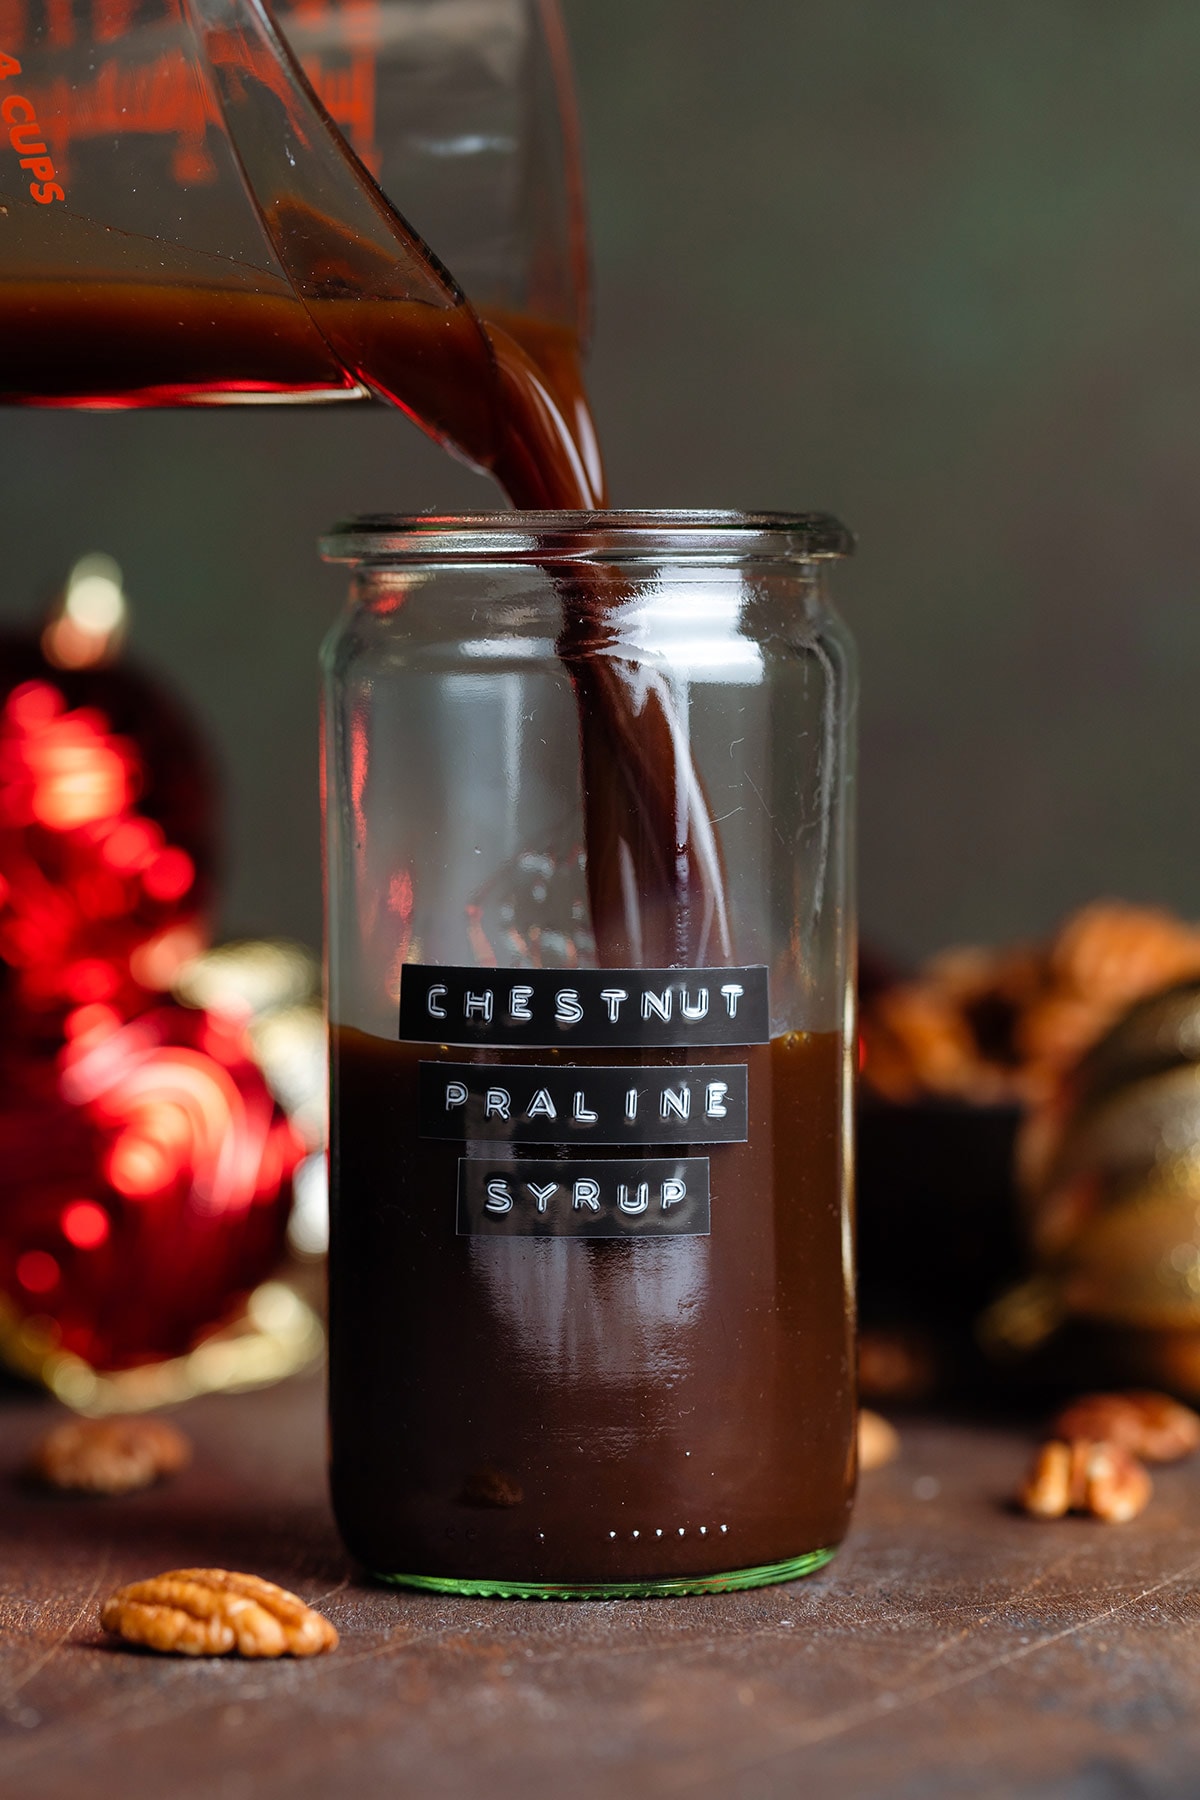 Dark brown syrup being poured into a glass jar with a black label that says chestnut praline syrup with christmas ornaments in the background.